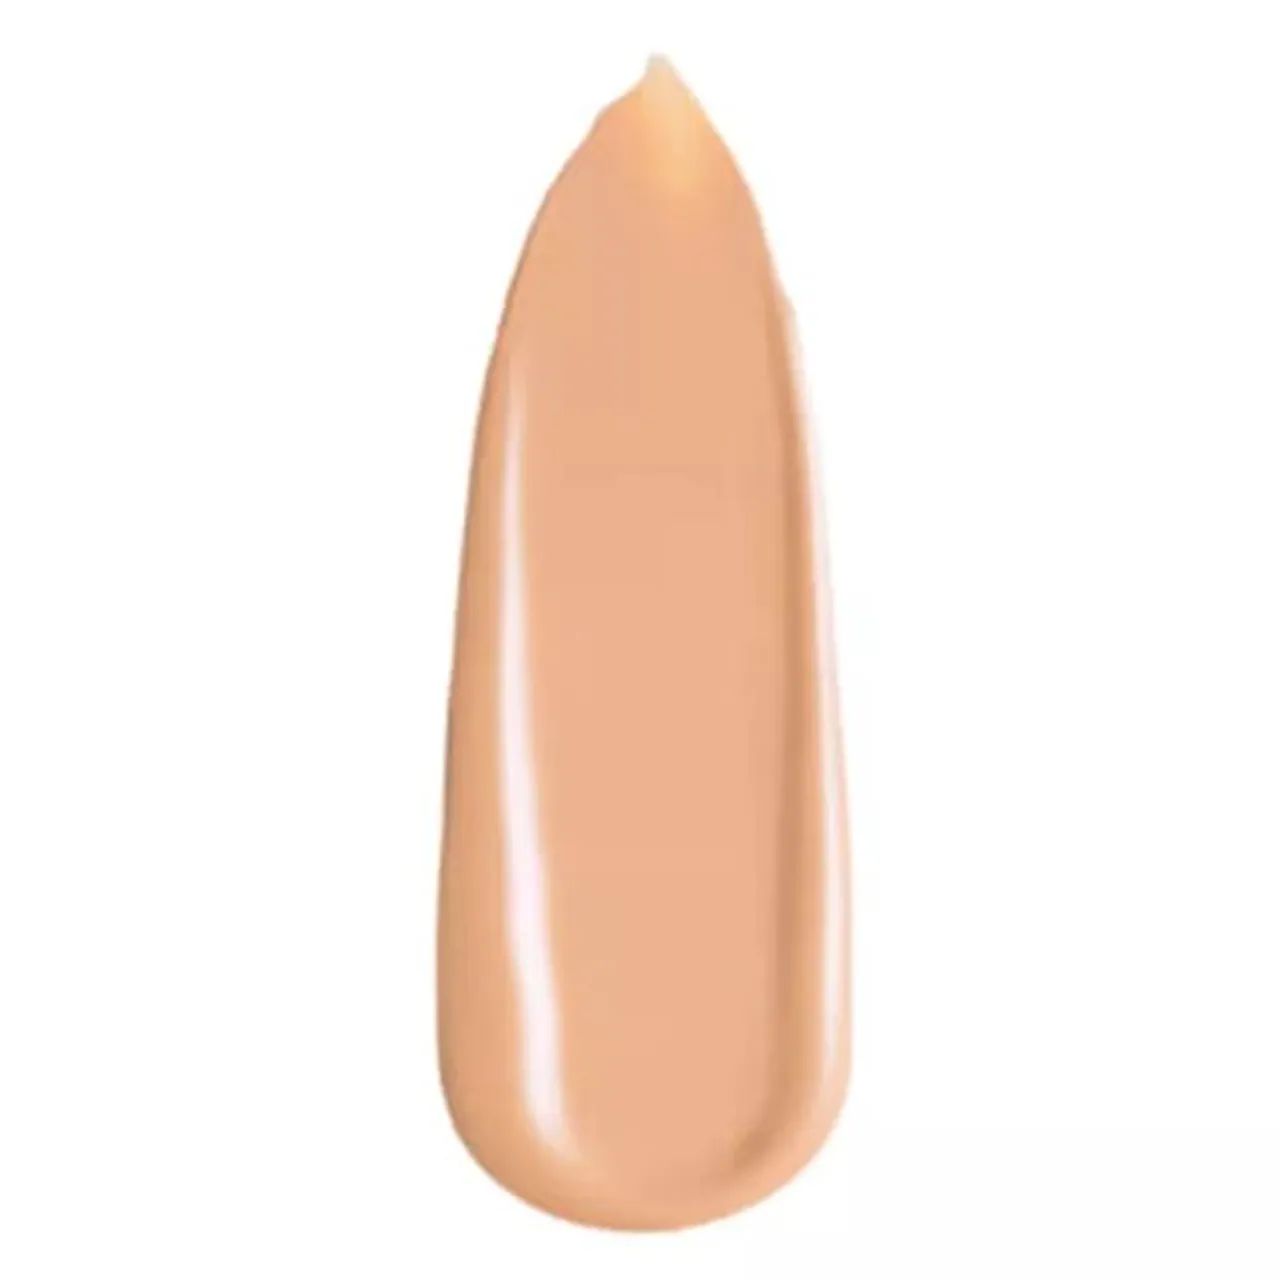 Clinique Even Better Glow Light Reflecting Makeup SPF 15 - 28 Ivory - Unisex - Size: 30ml